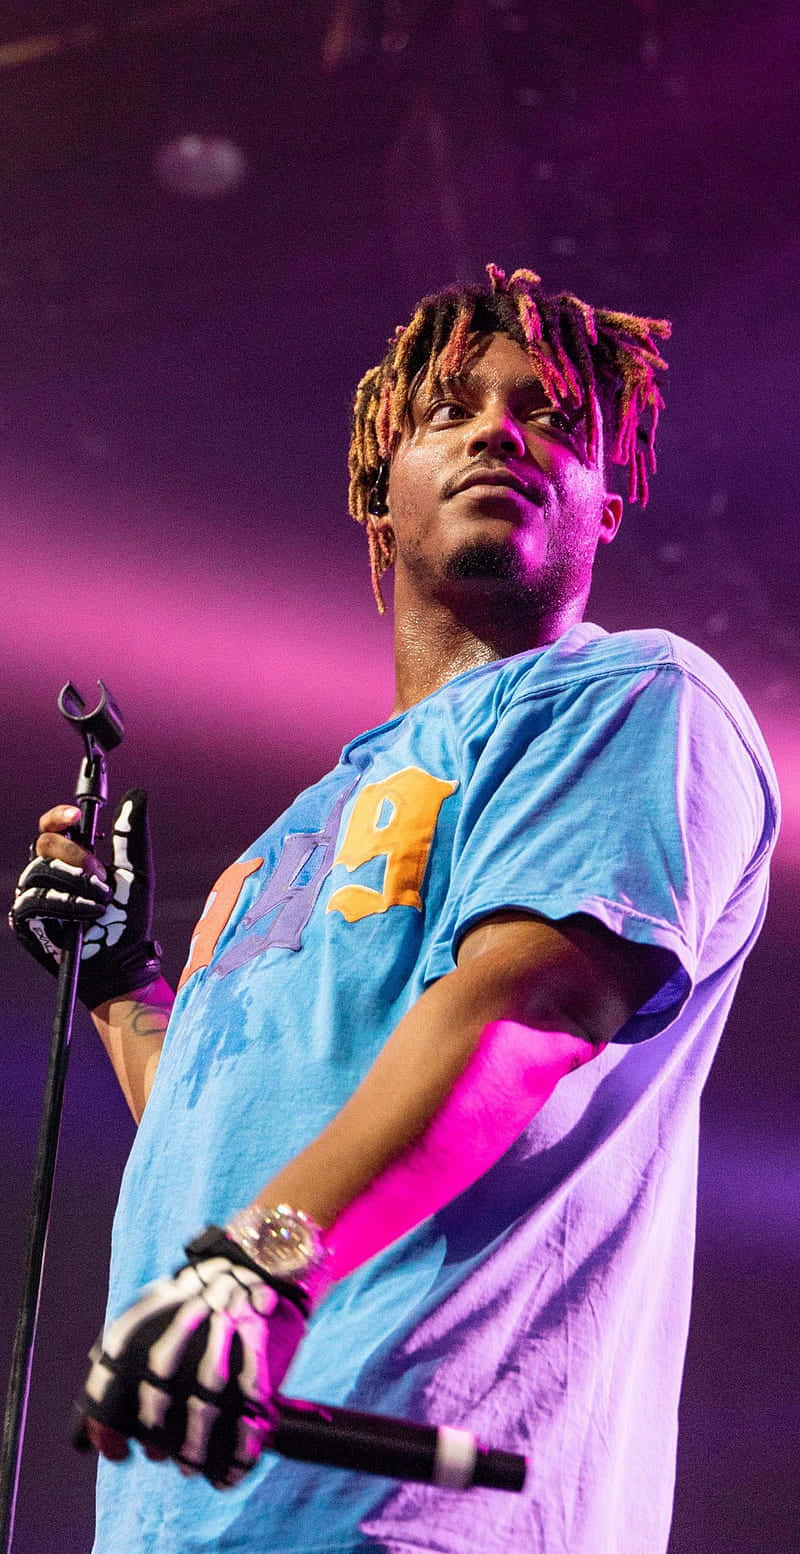 "The crowd goes wild for Juice Wrld's electrifying performance!" Wallpaper